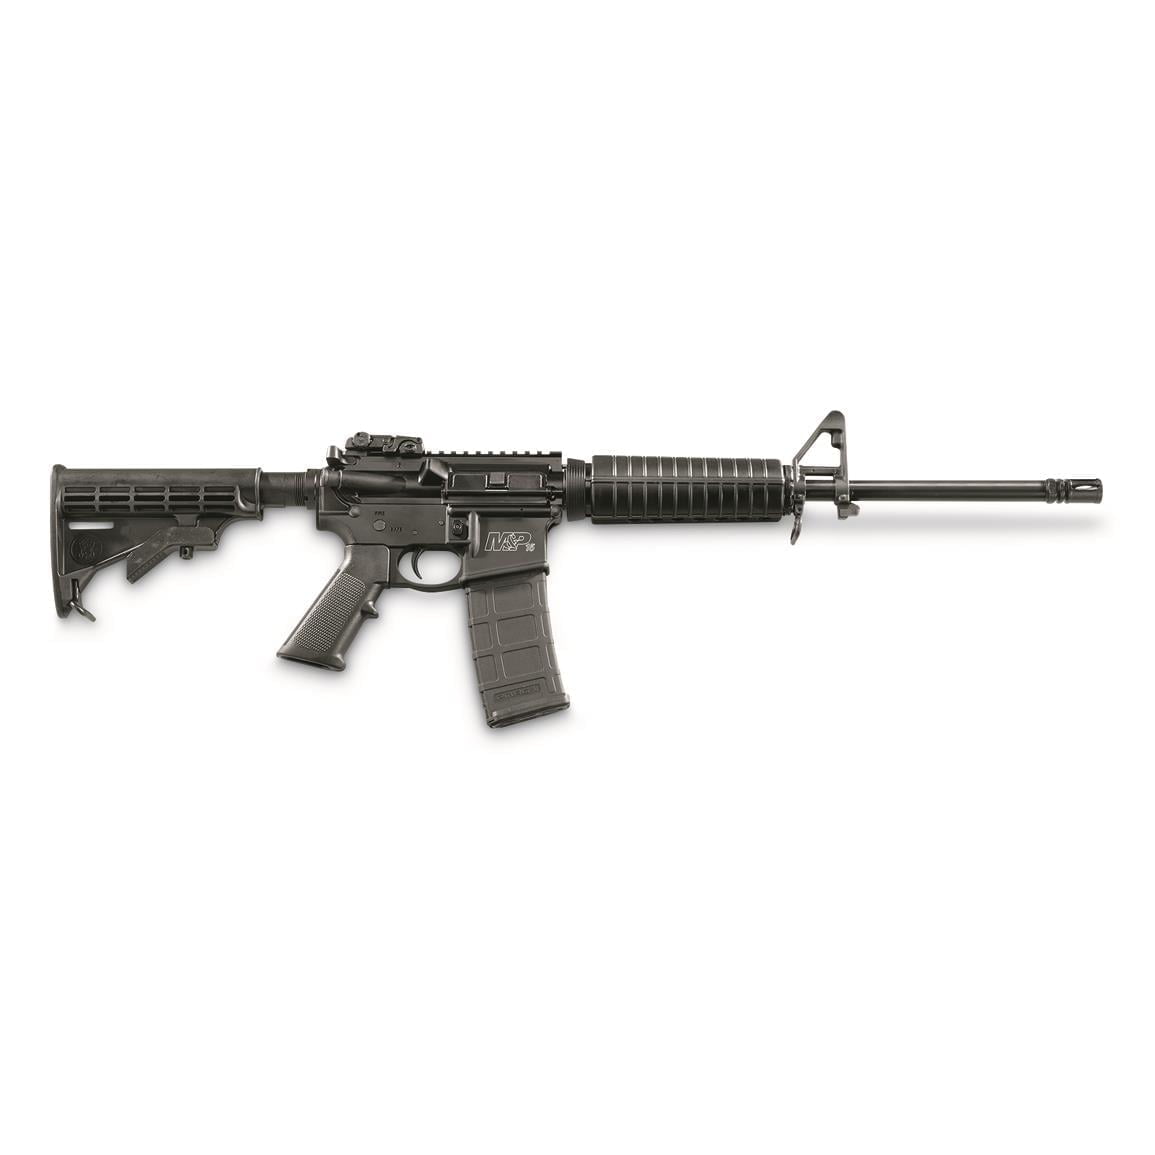 The Smith & Wesson M&P15 Sport is a cheap AR-15, and it's also one of the best discount rifles in USA gun stores.